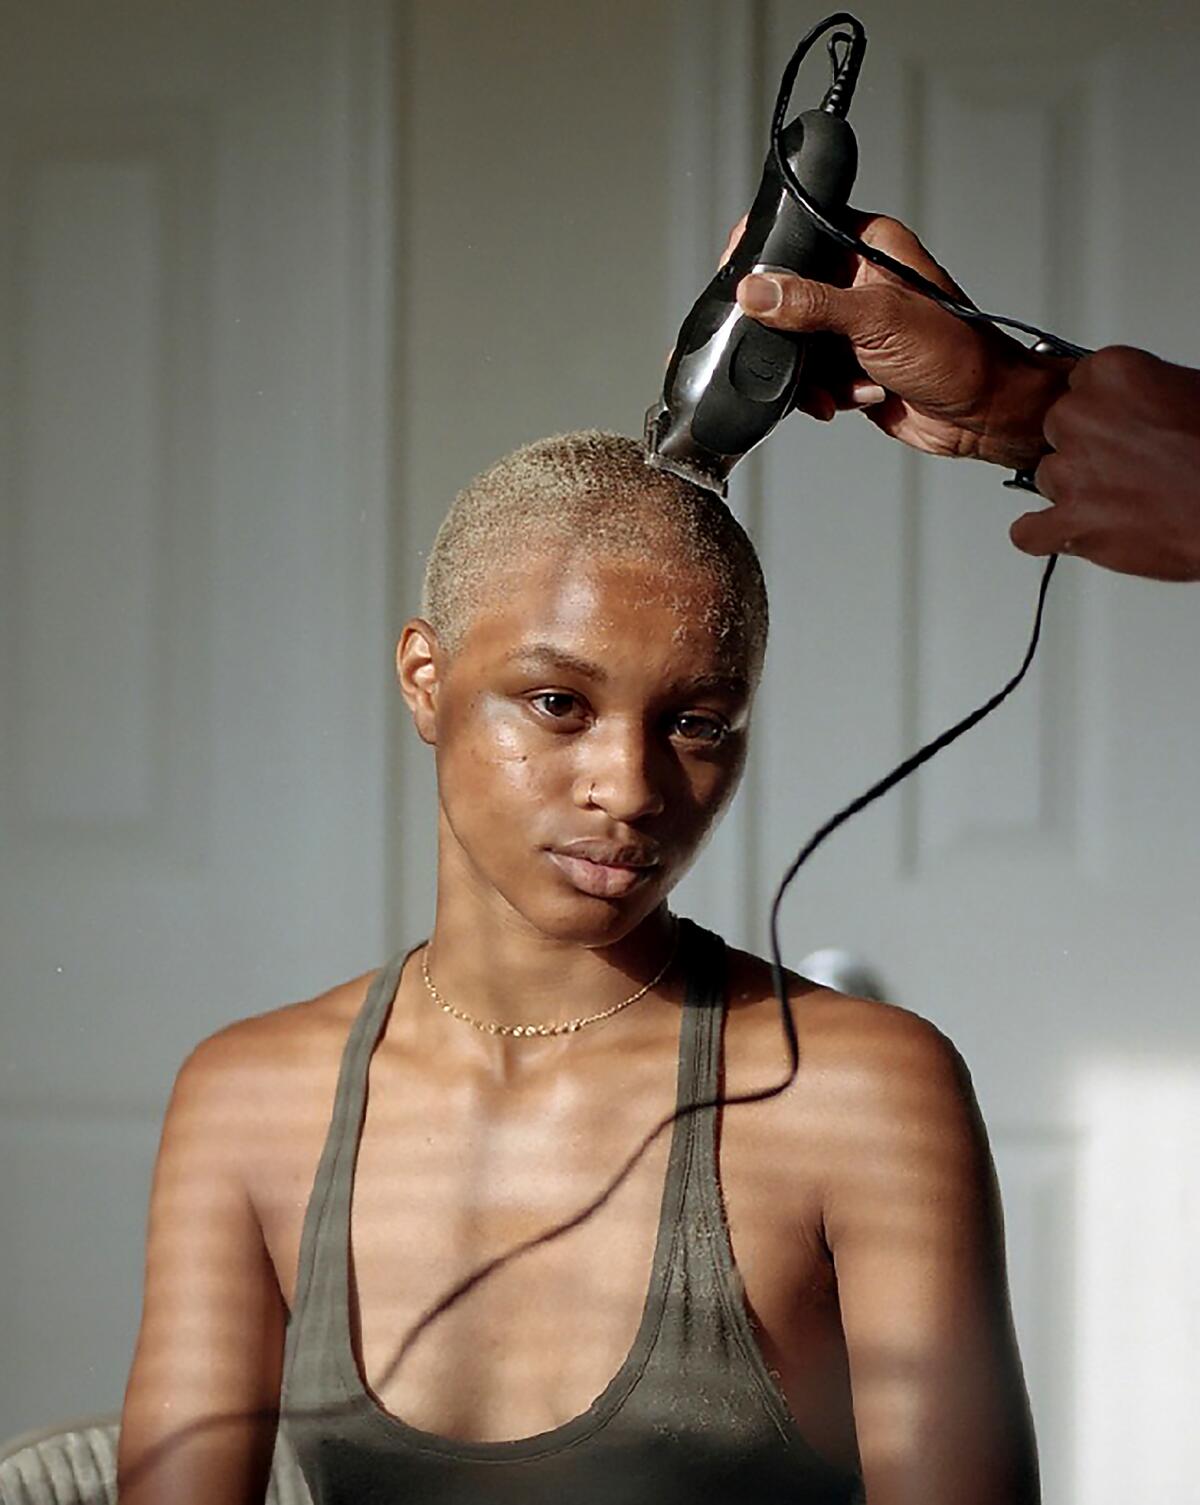 A portrait of a woman getting her hair buzzed